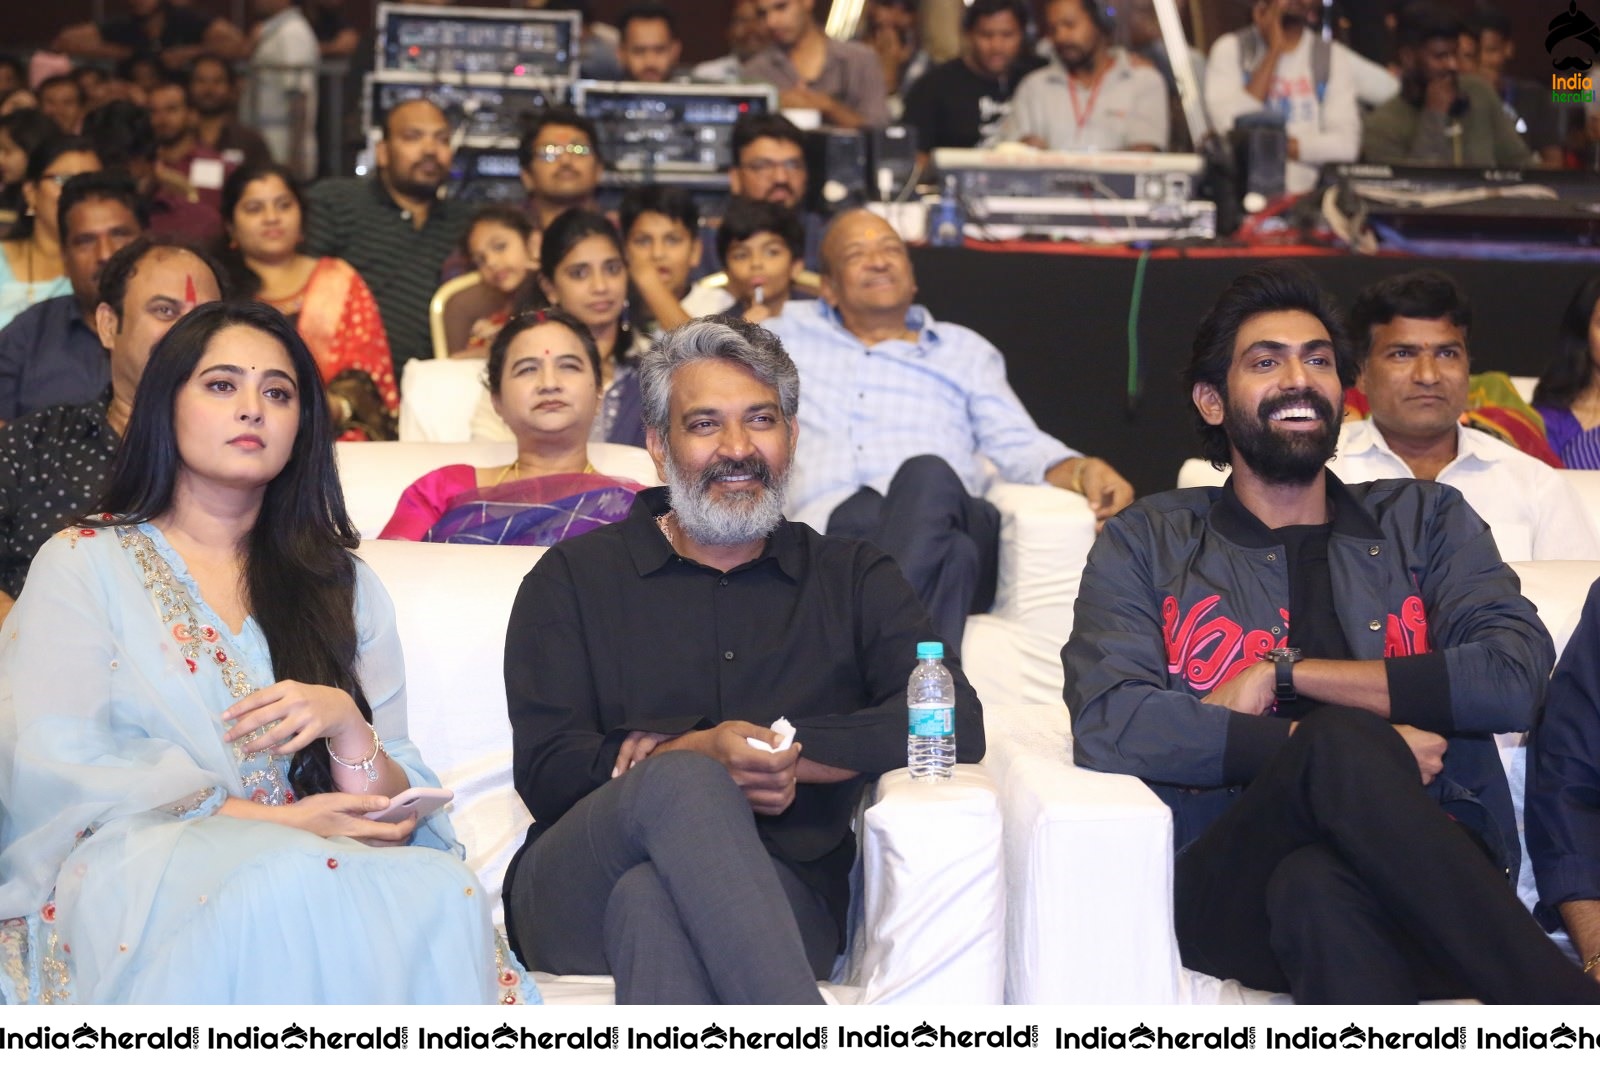 Director SS Rajamouli spotted with Anushka Shetty